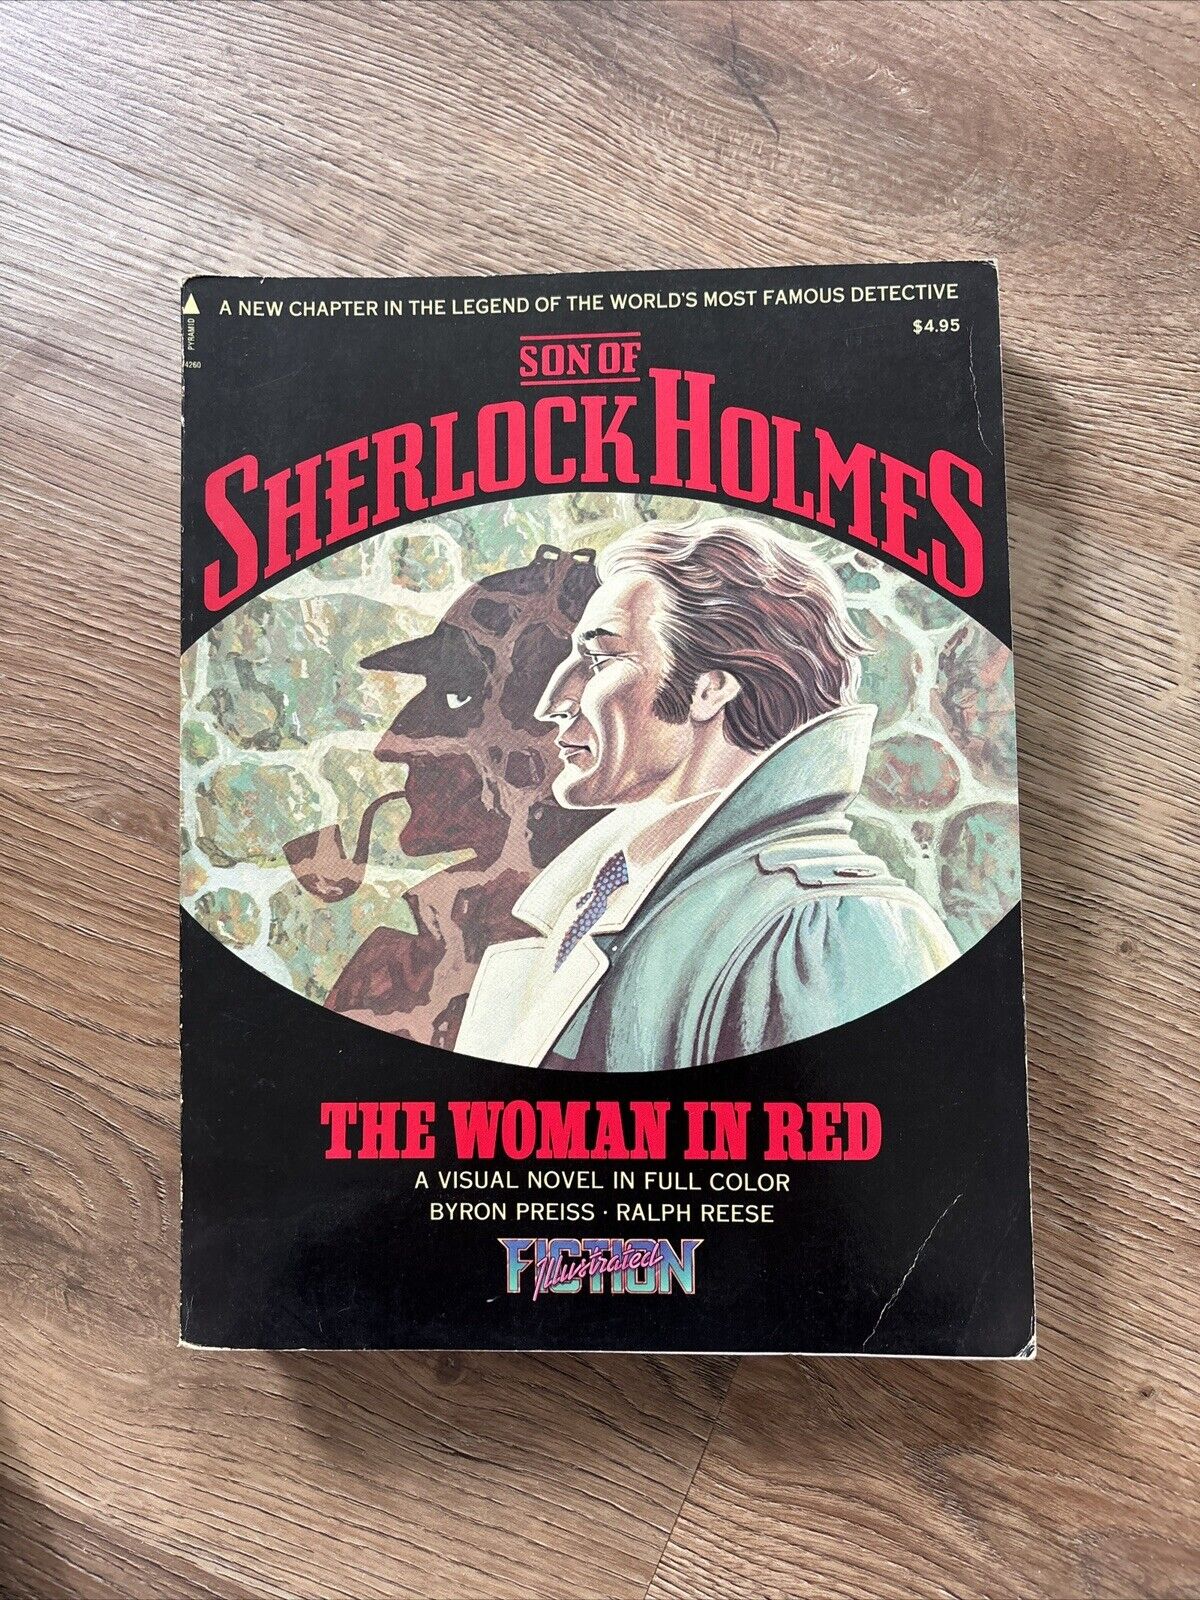 Son of Sherlock Holmes The Woman In Red 1977